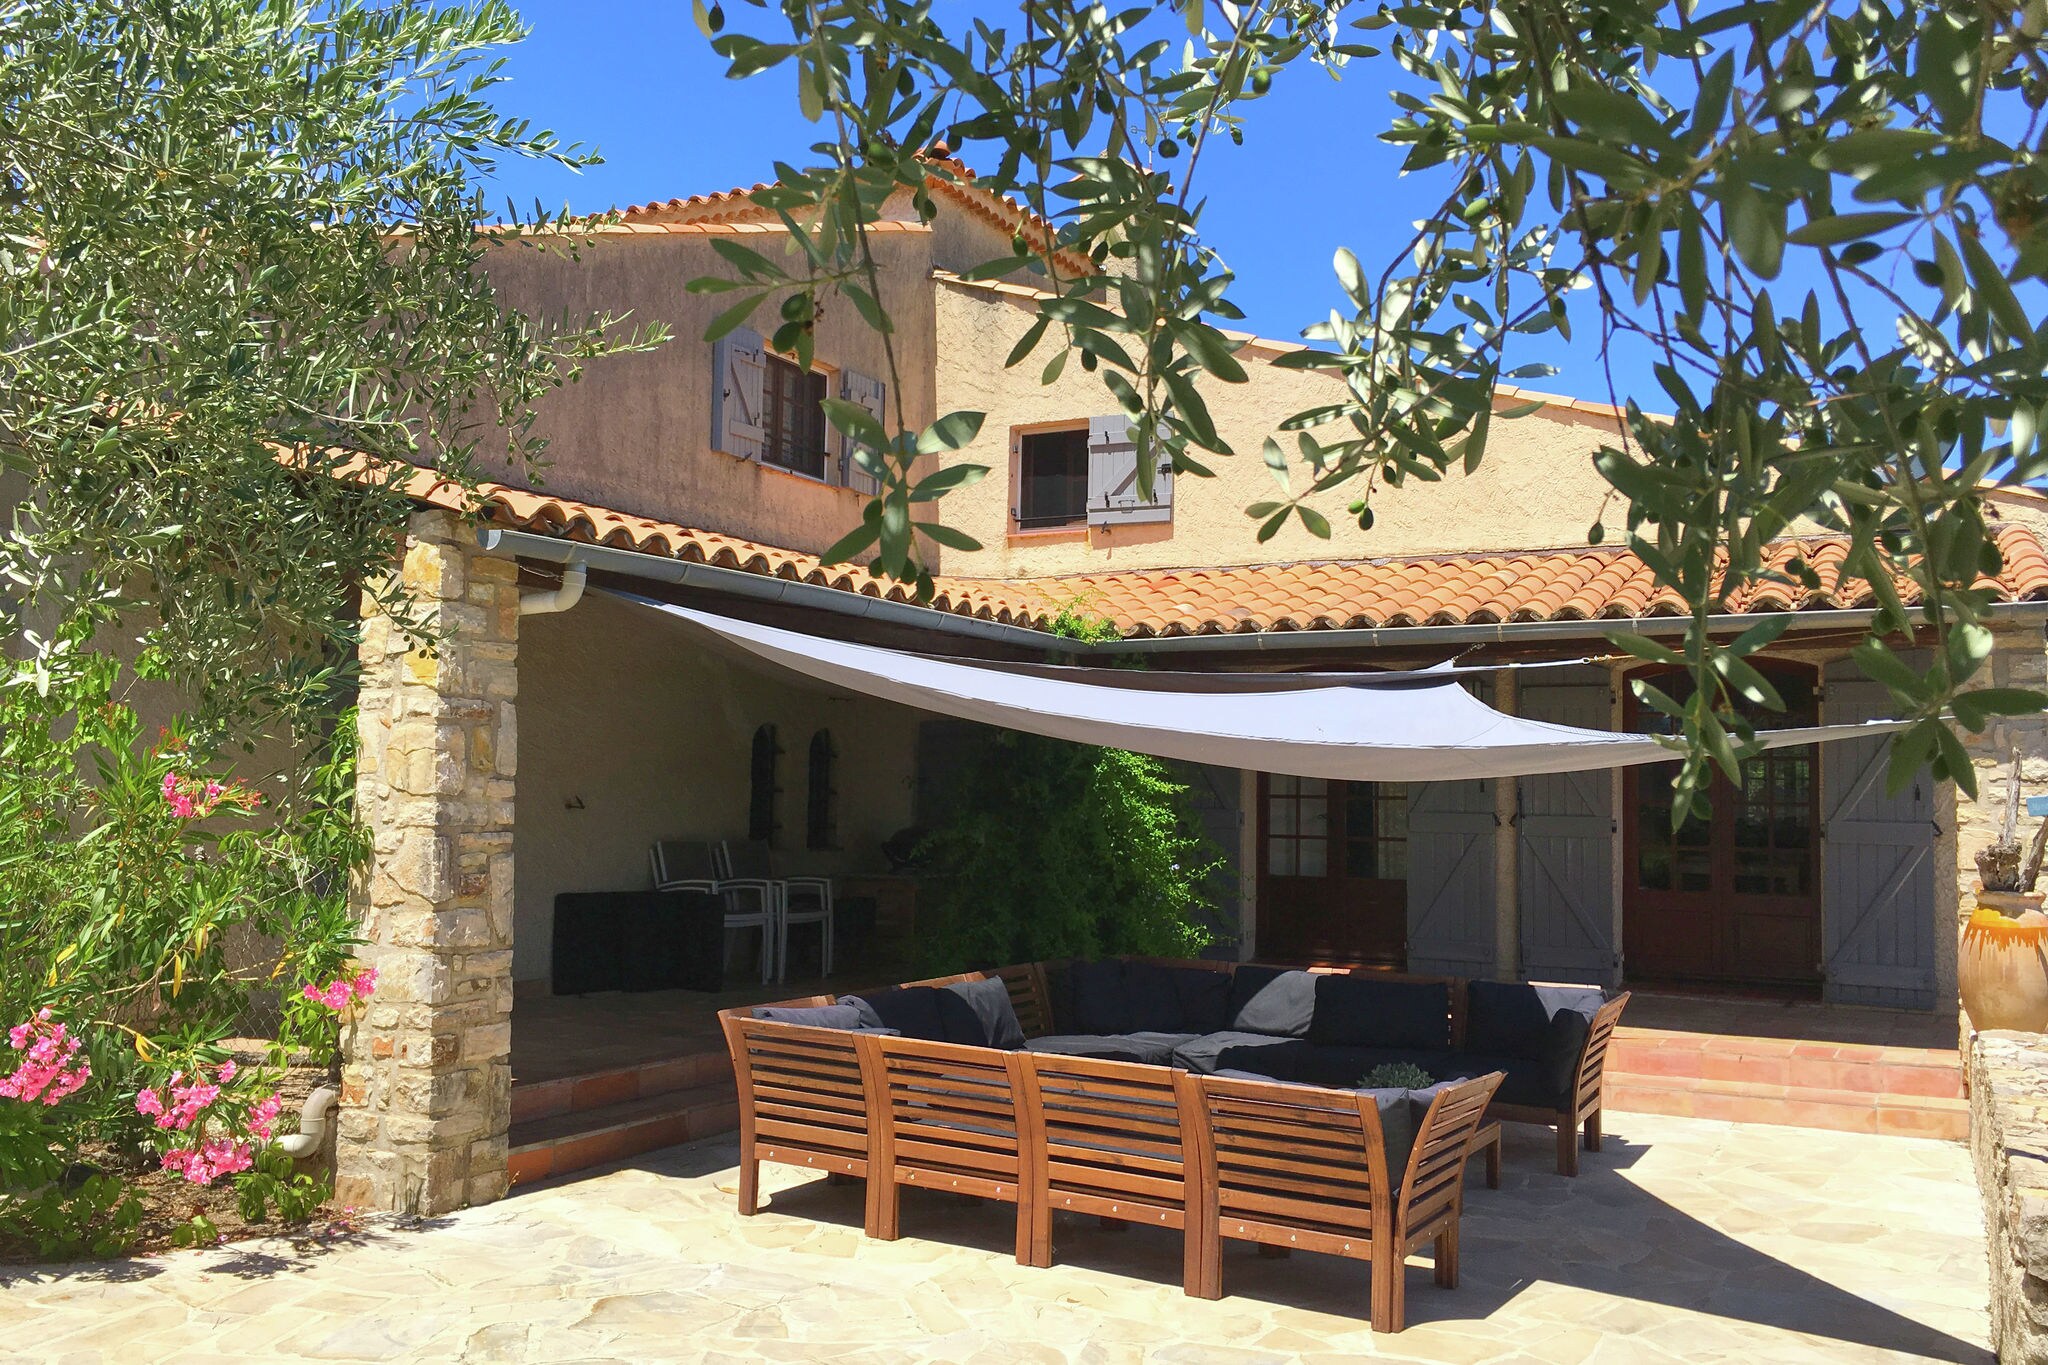 Provençal villa with private swimming pool, 900 m from the picturesque village of Flayosc